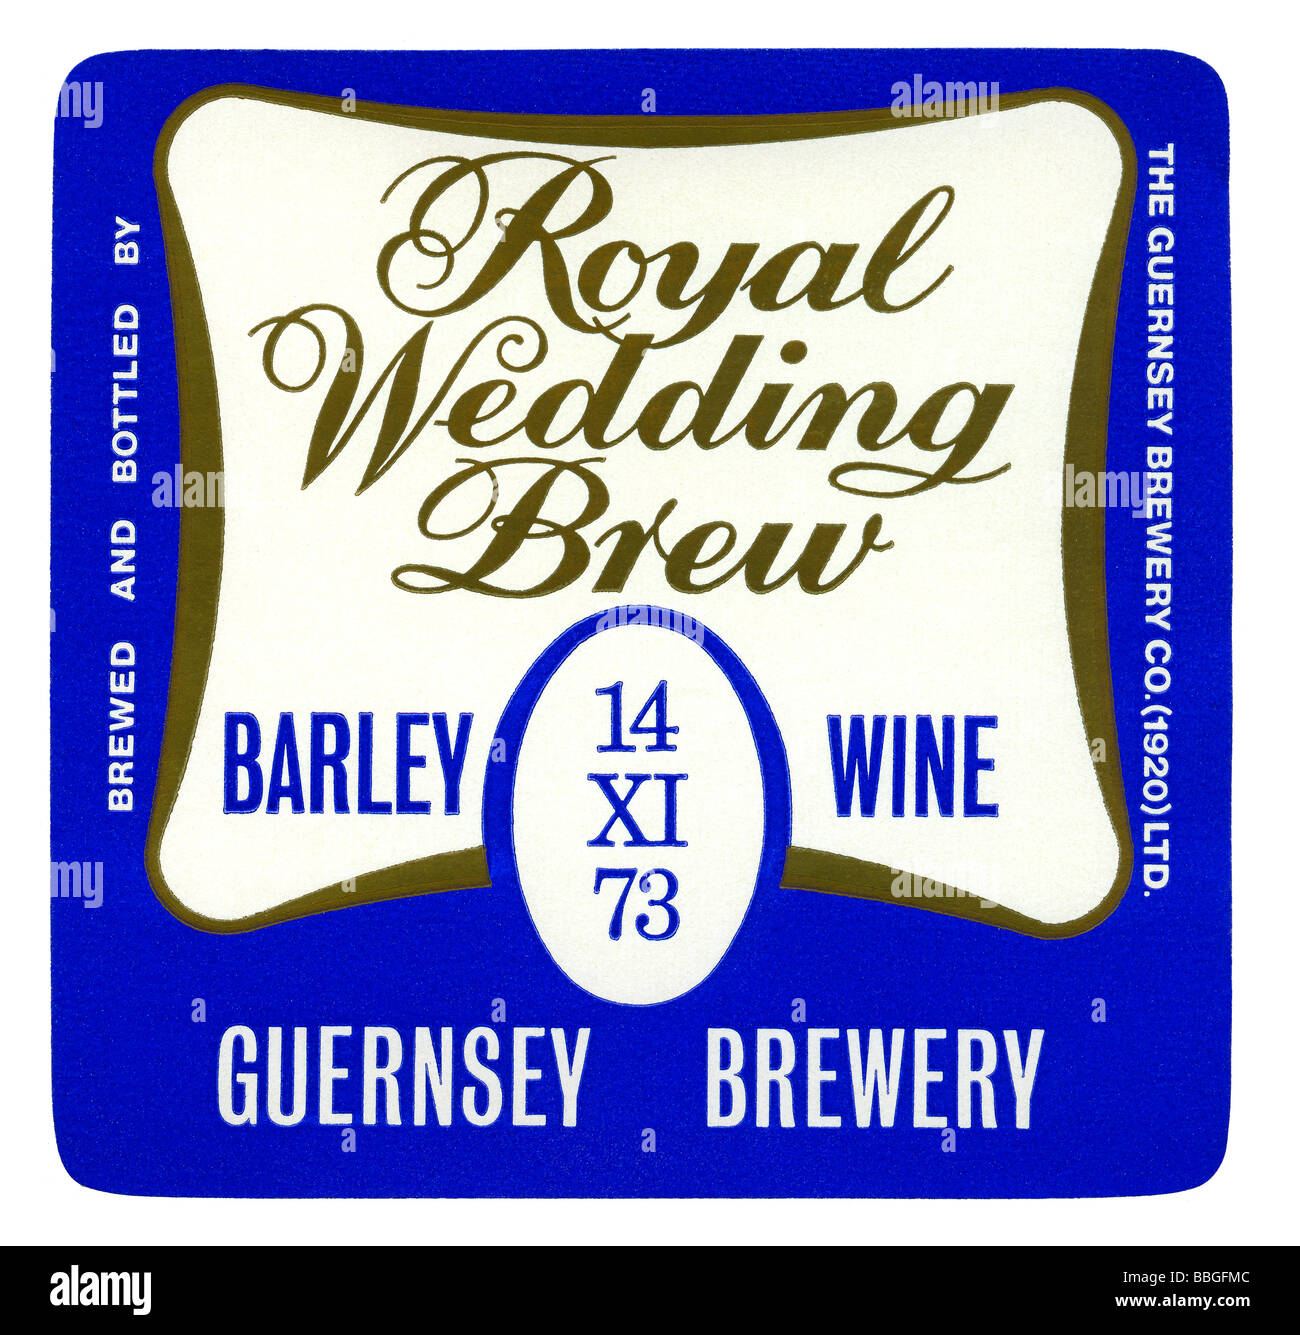 Old British beer label for Guernsey Brewery's Royal Wedding Brew, Guernsey, Channel Islands, 1973 Stock Photo